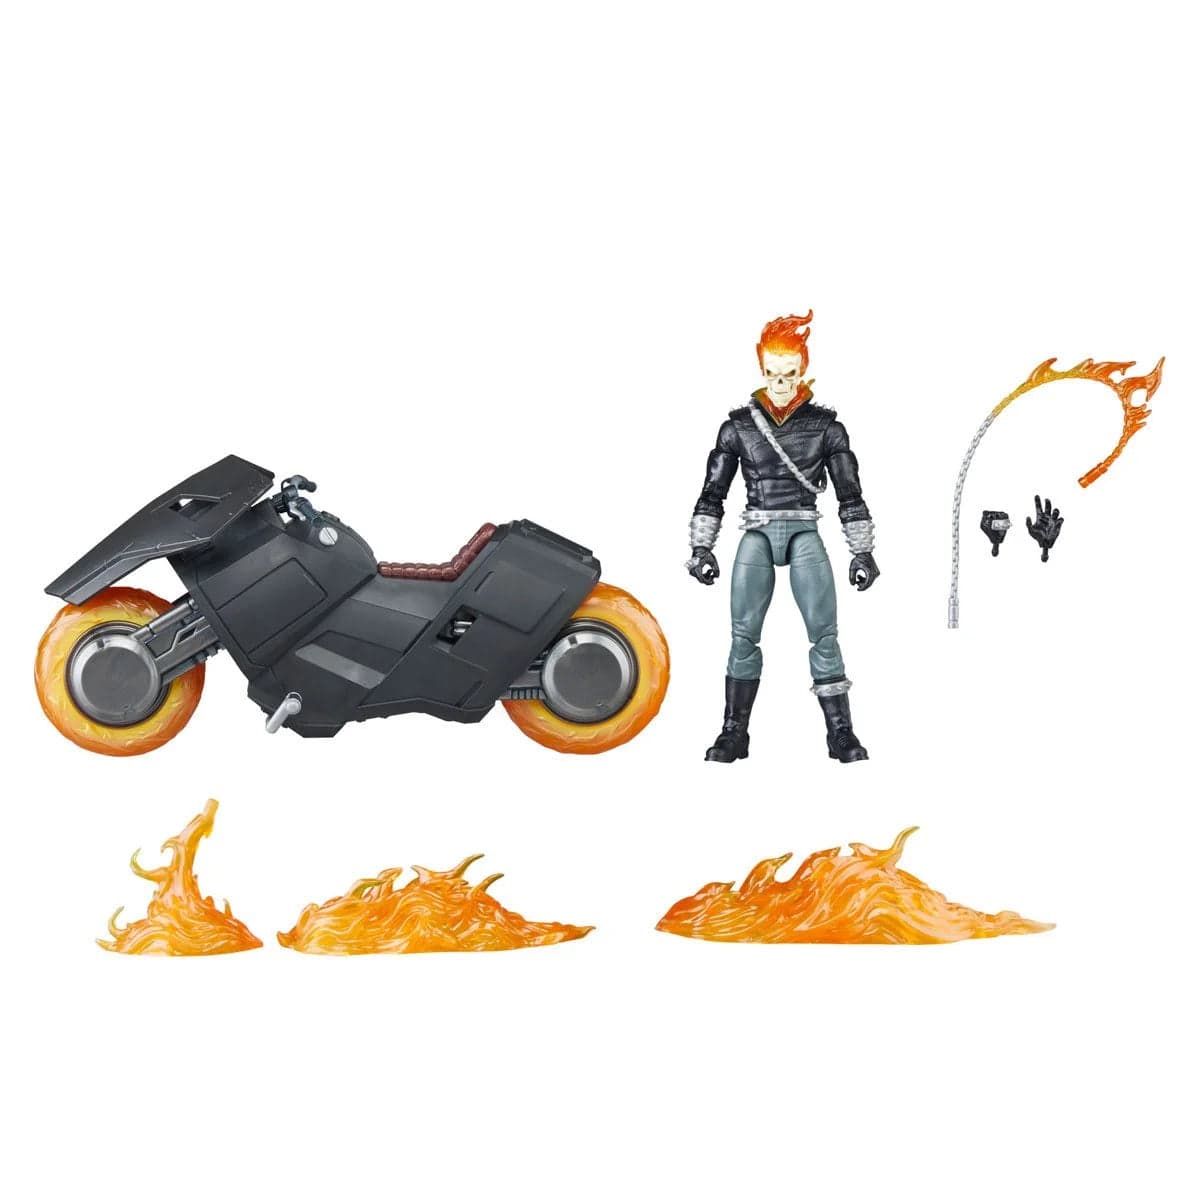 Marvel-Legends-Series-Ghost-Rider-_Danny-Ketch_-with-Motorcycle-Action-Figure-Flame-accessories